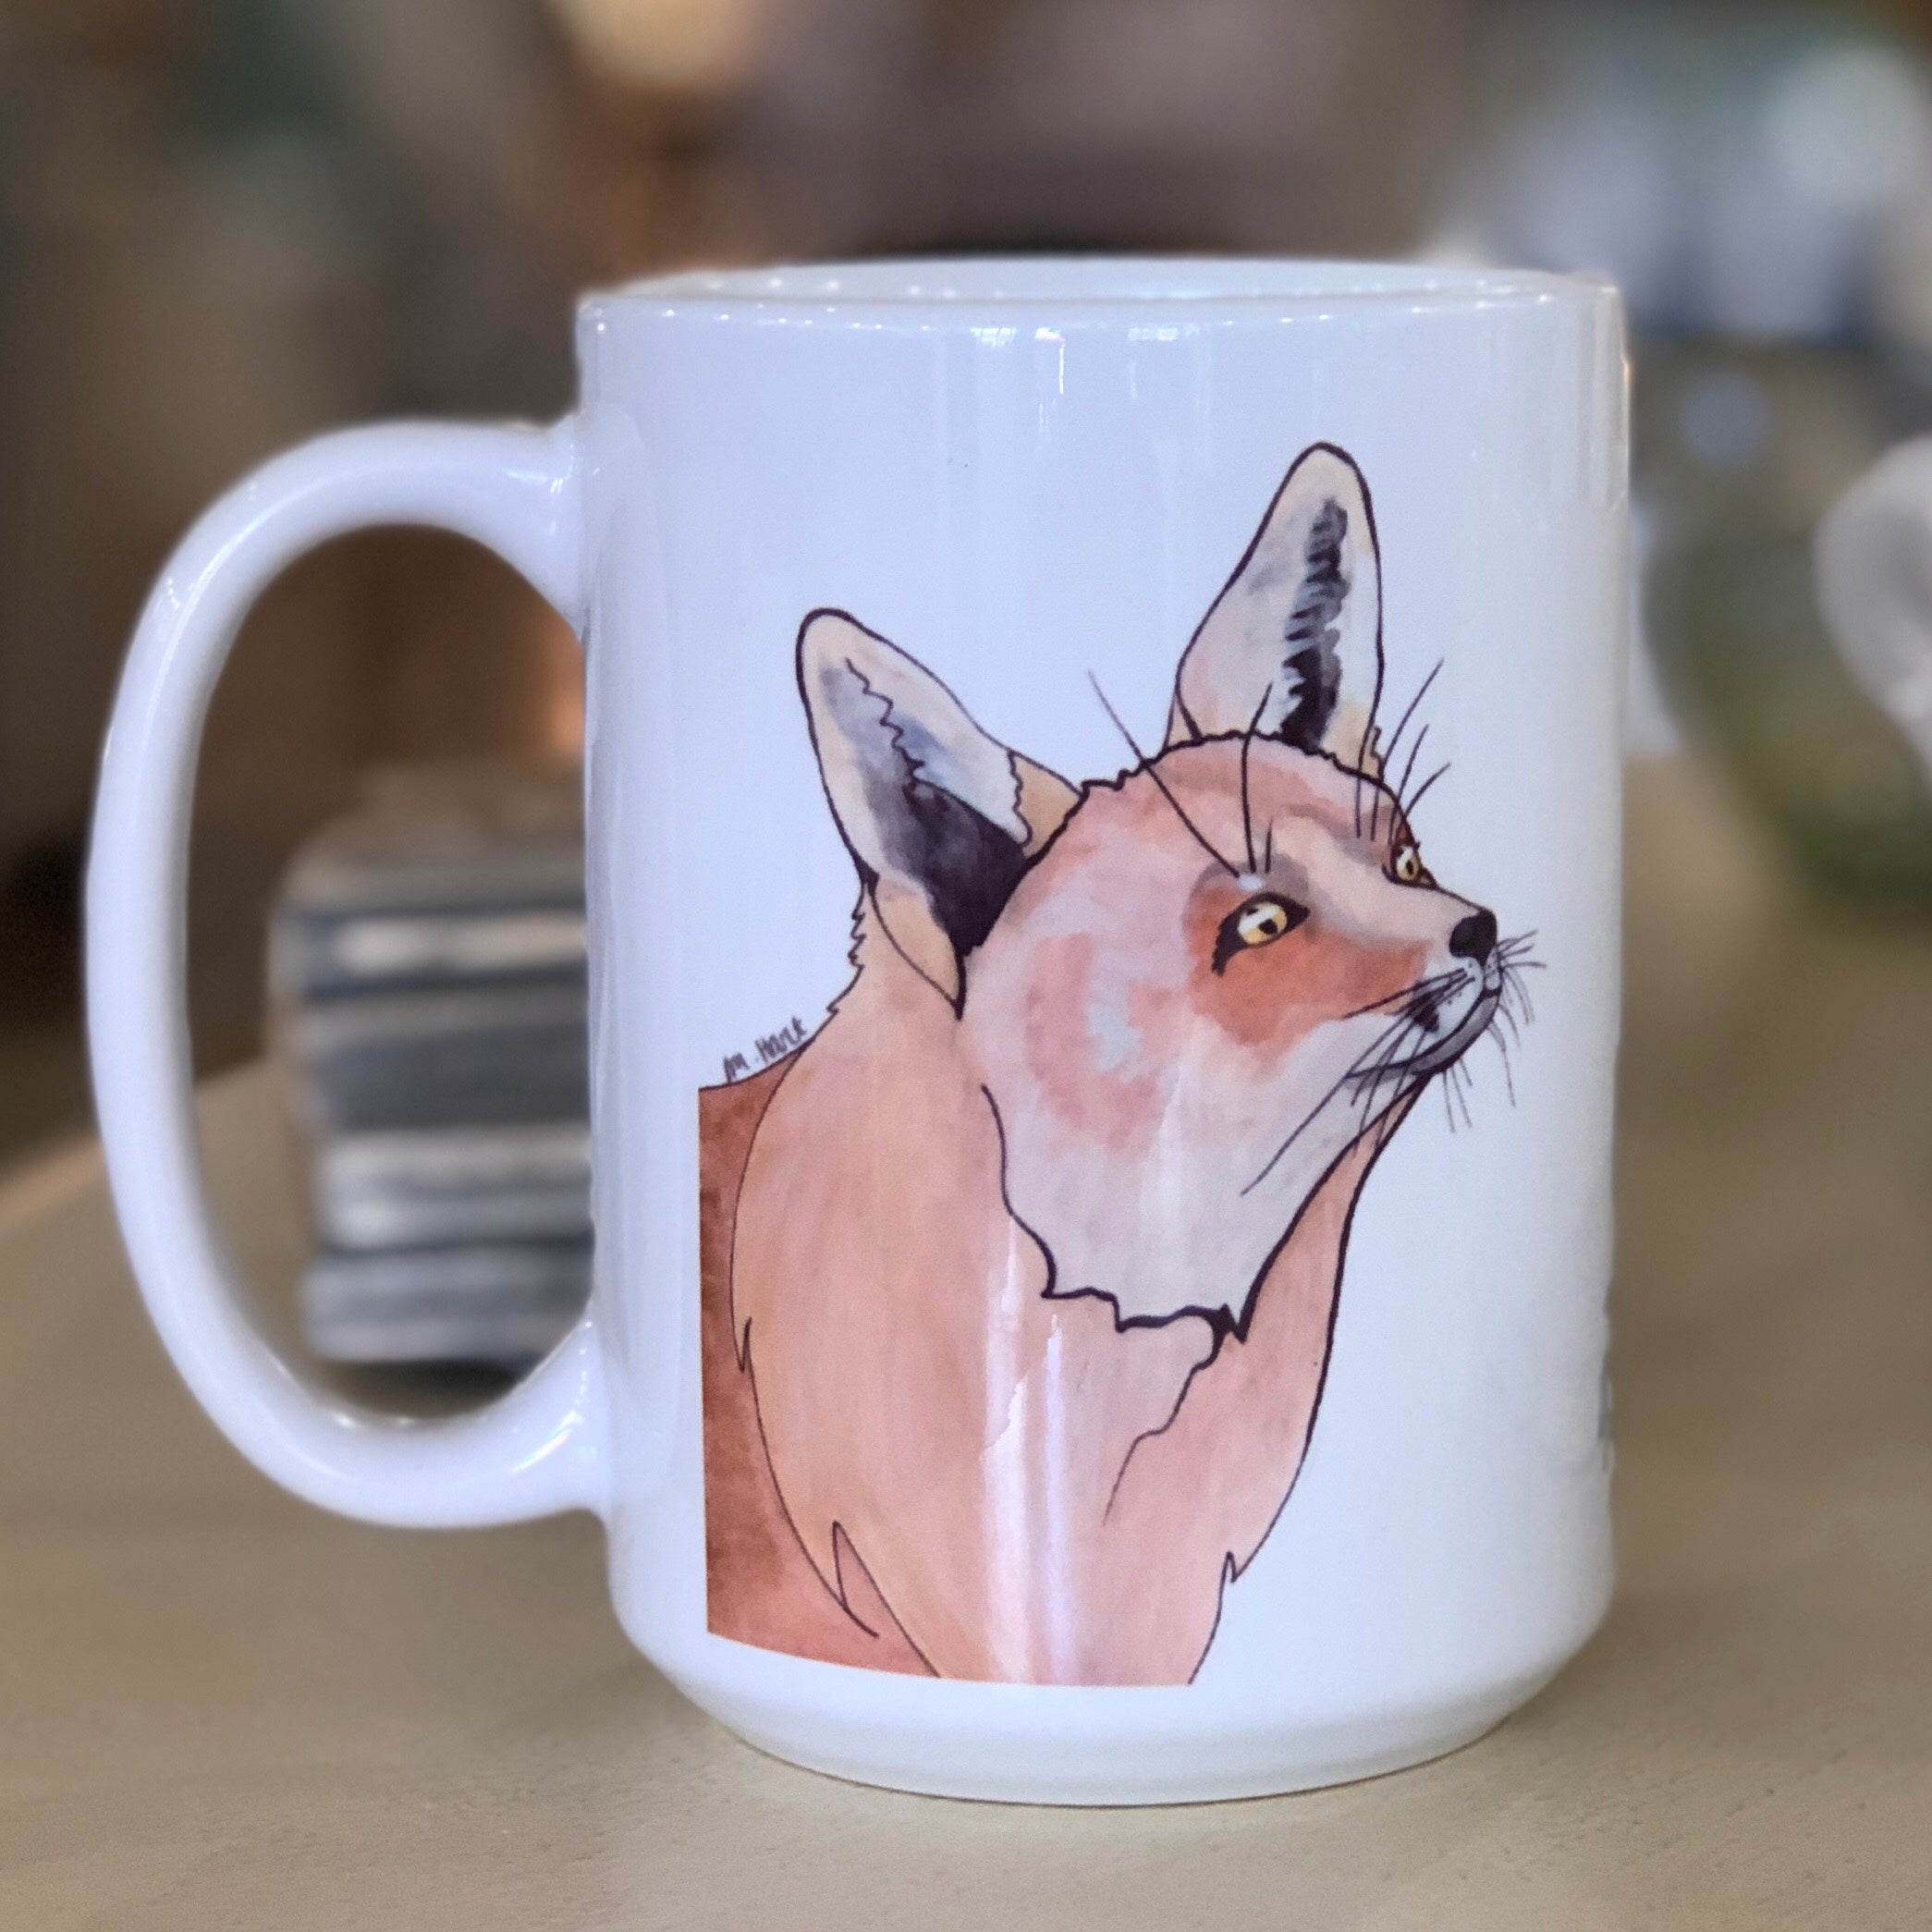 Pictured is a white coffe mug with a watercolor design of a fox on it.